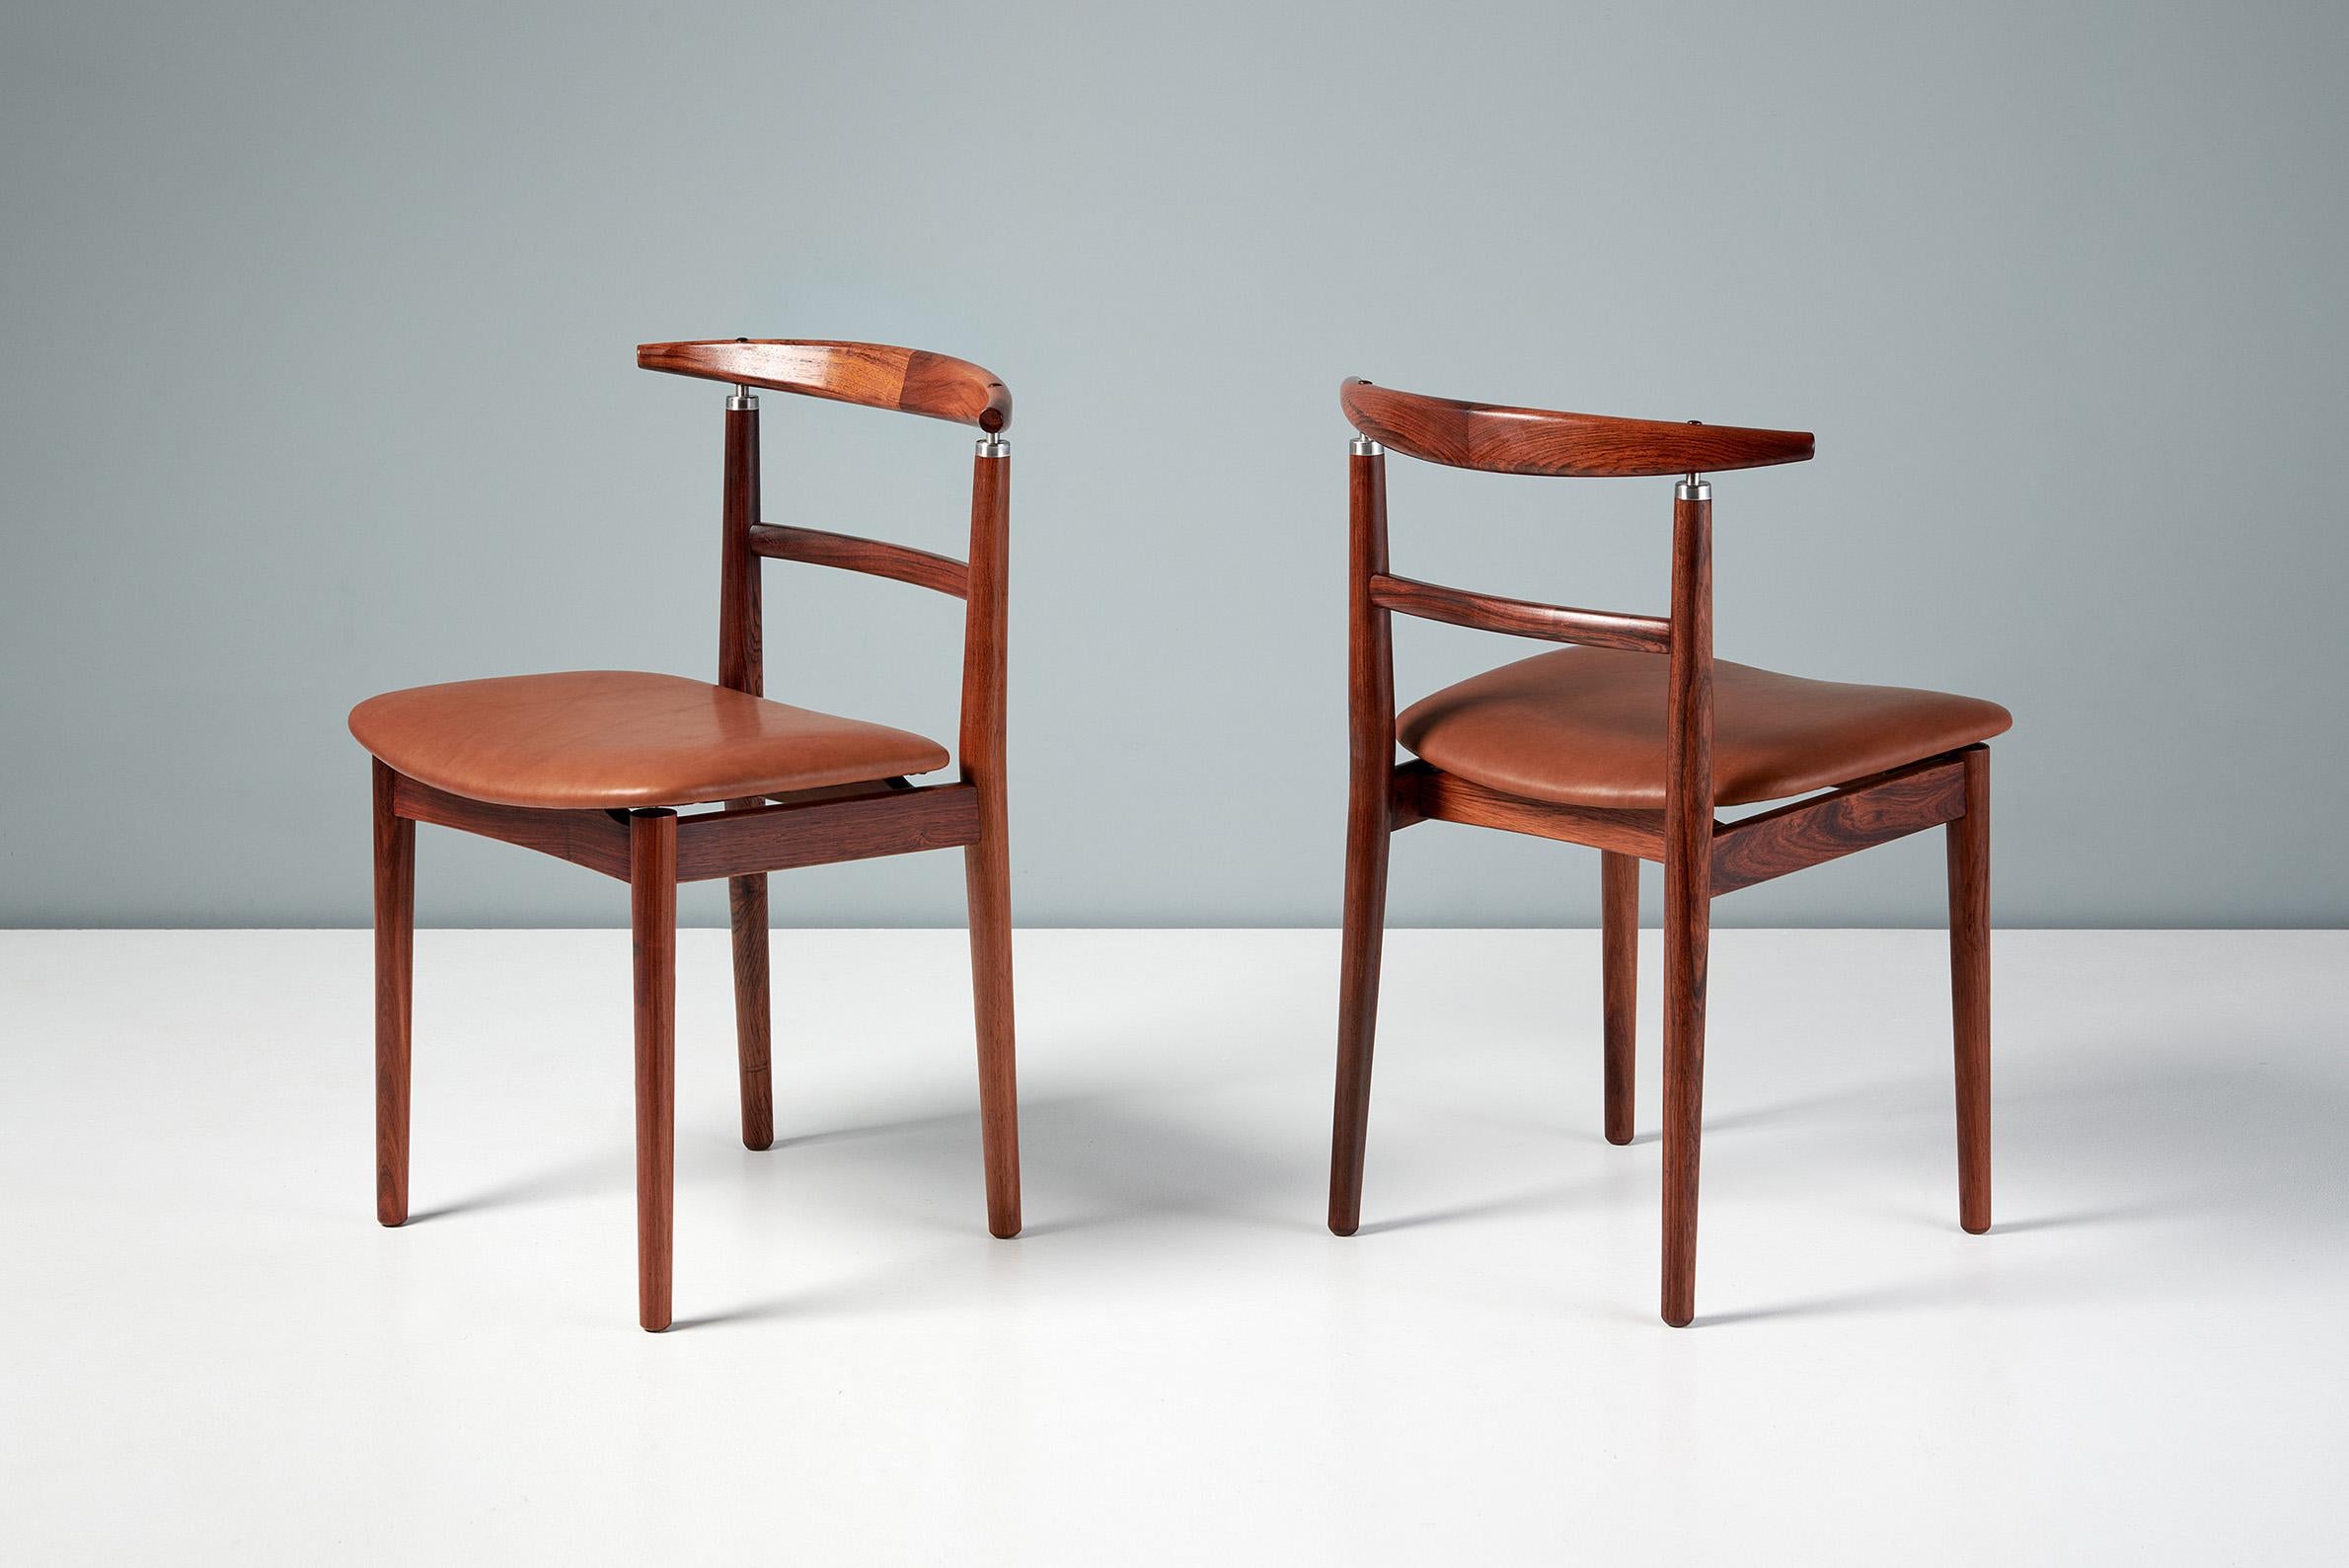 Borge Rammeskov Set of 8 Danish Rosewood Dining Chairs, c1960s For Sale 1